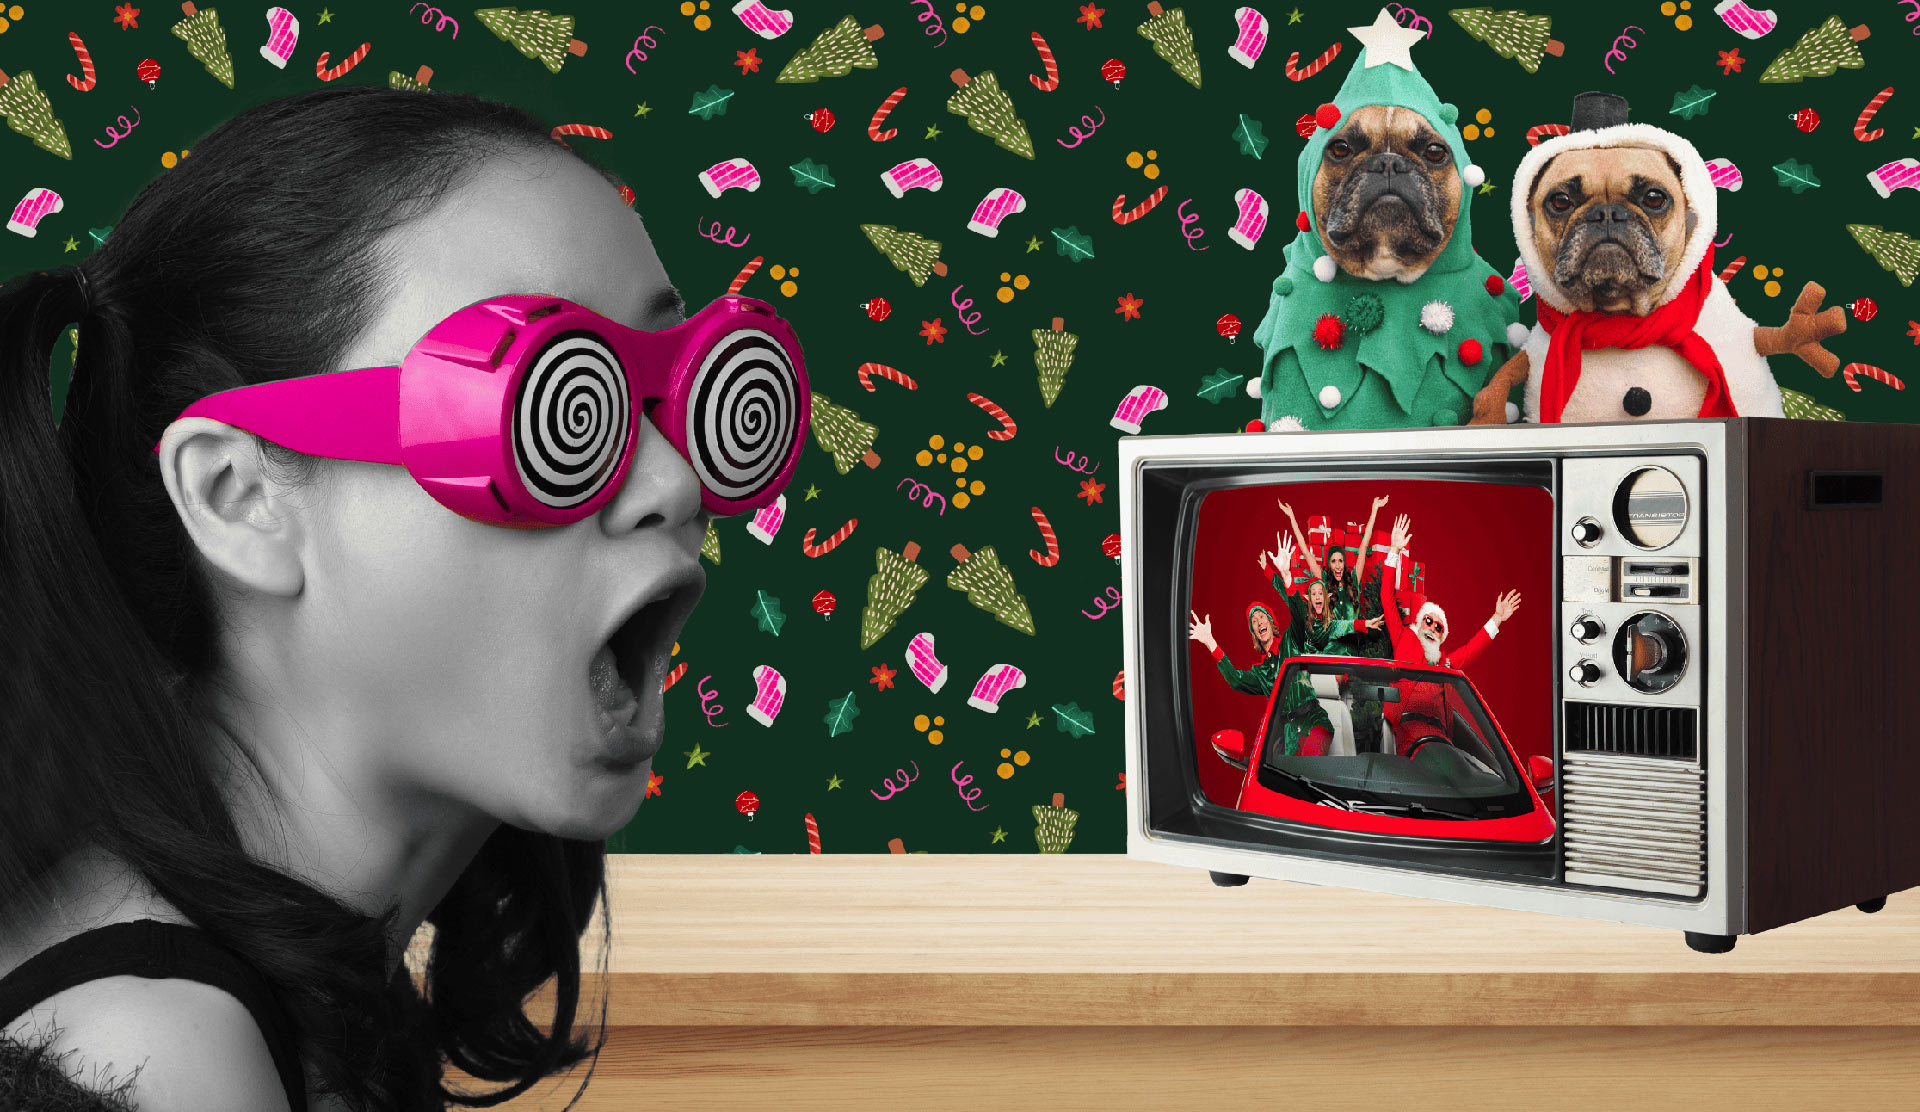 An image of a young woman watching TV at Christmas while her dogs dressed in Christmas fancy dress look on.